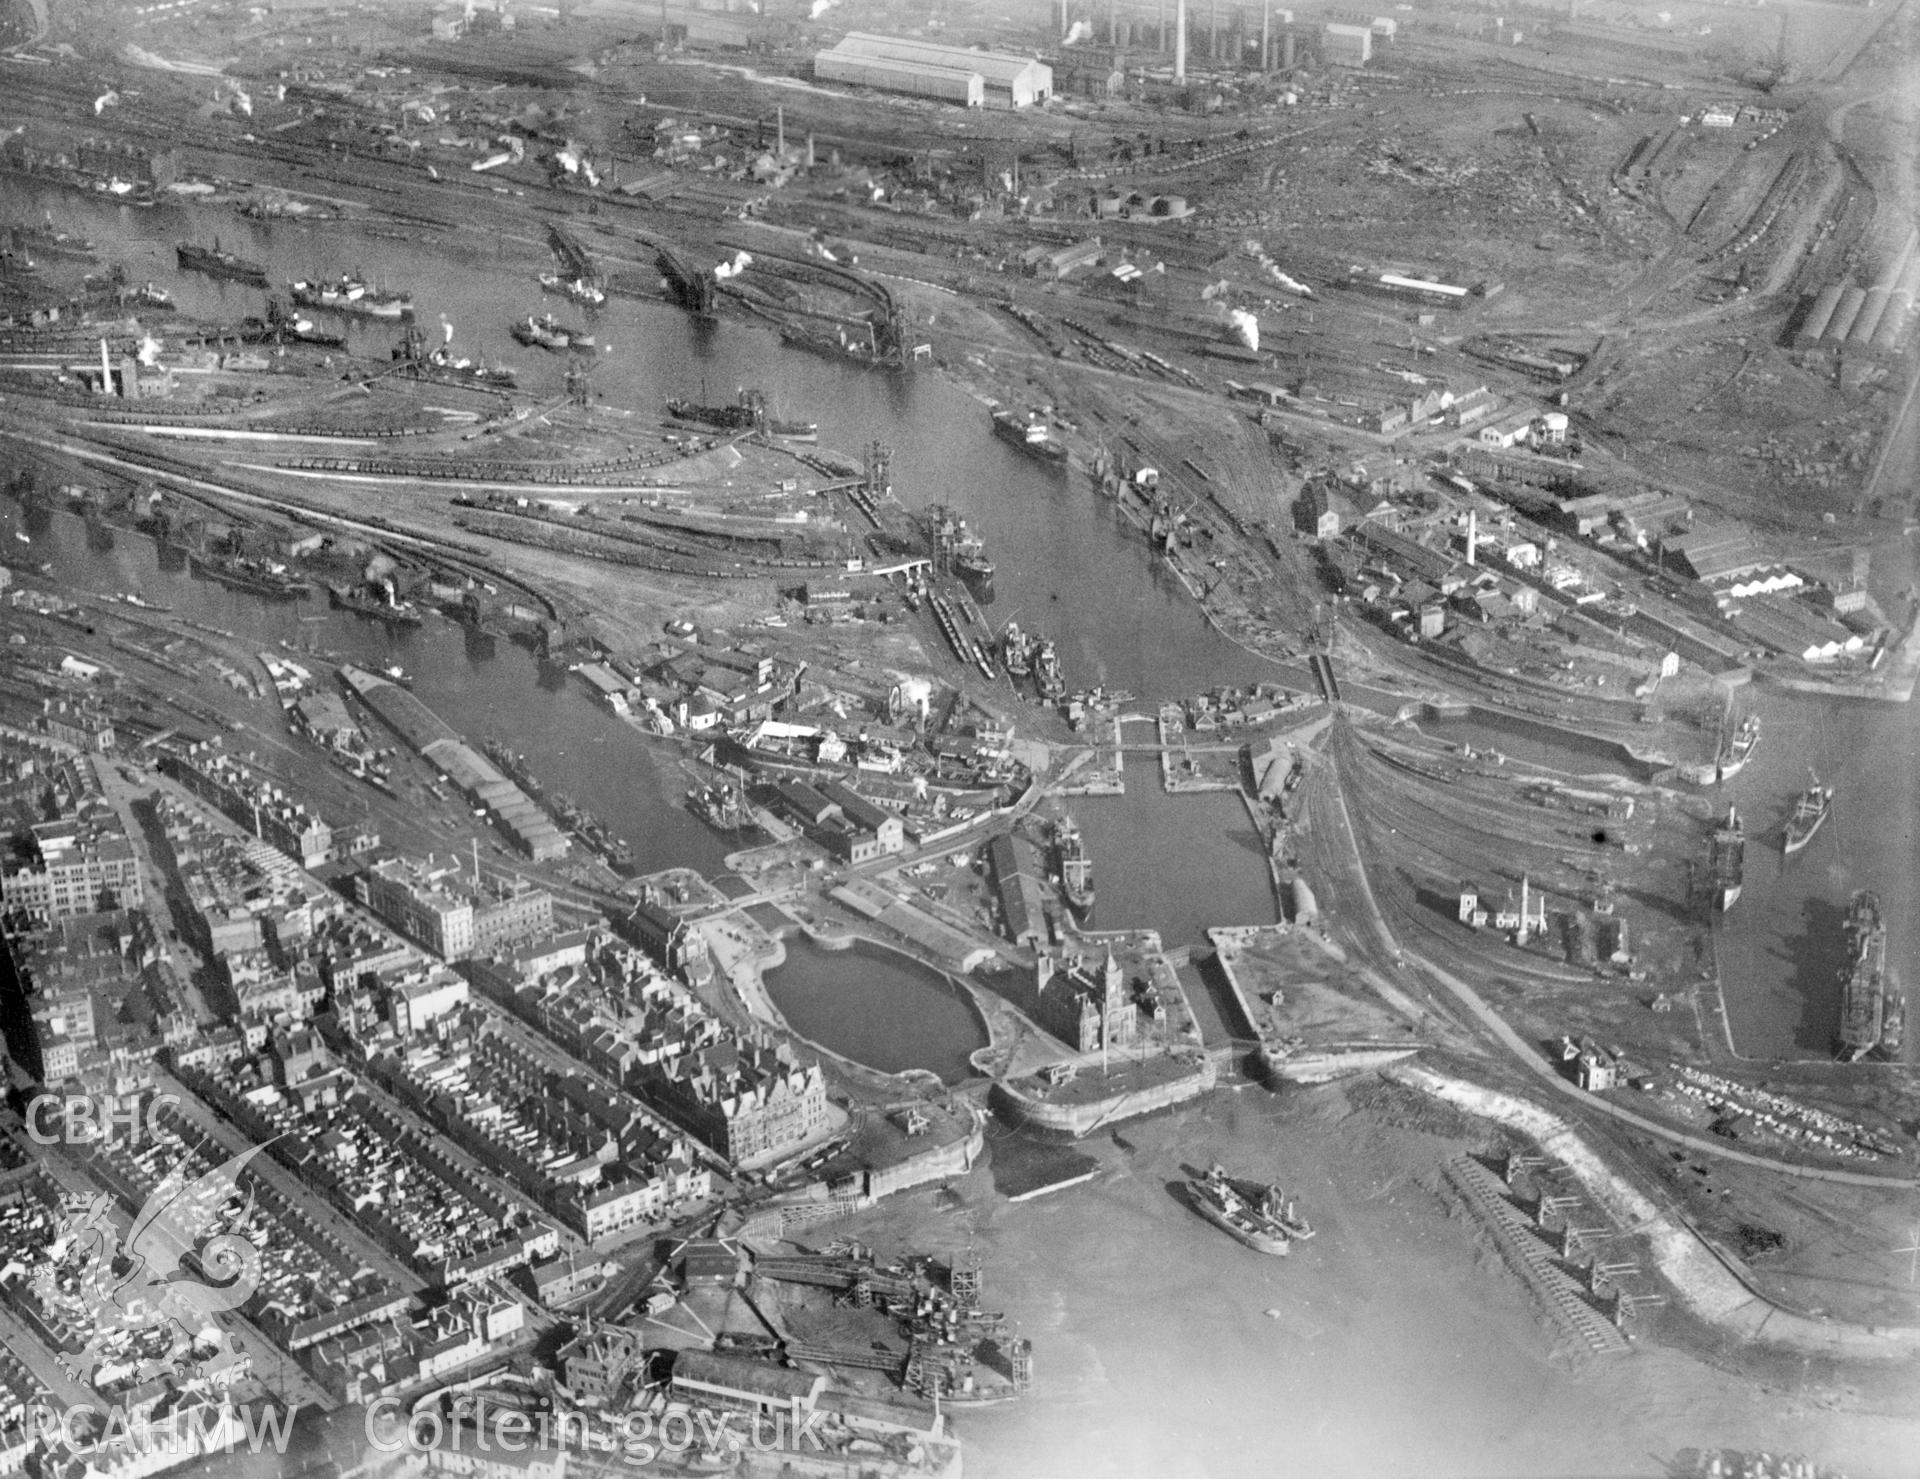 Black and white oblique aerial photograph showing Cardiff Docks, from Aerofilms album no W22 (Glamorgan Cardiff), taken by Aerofilms Ltd and dated 1925.